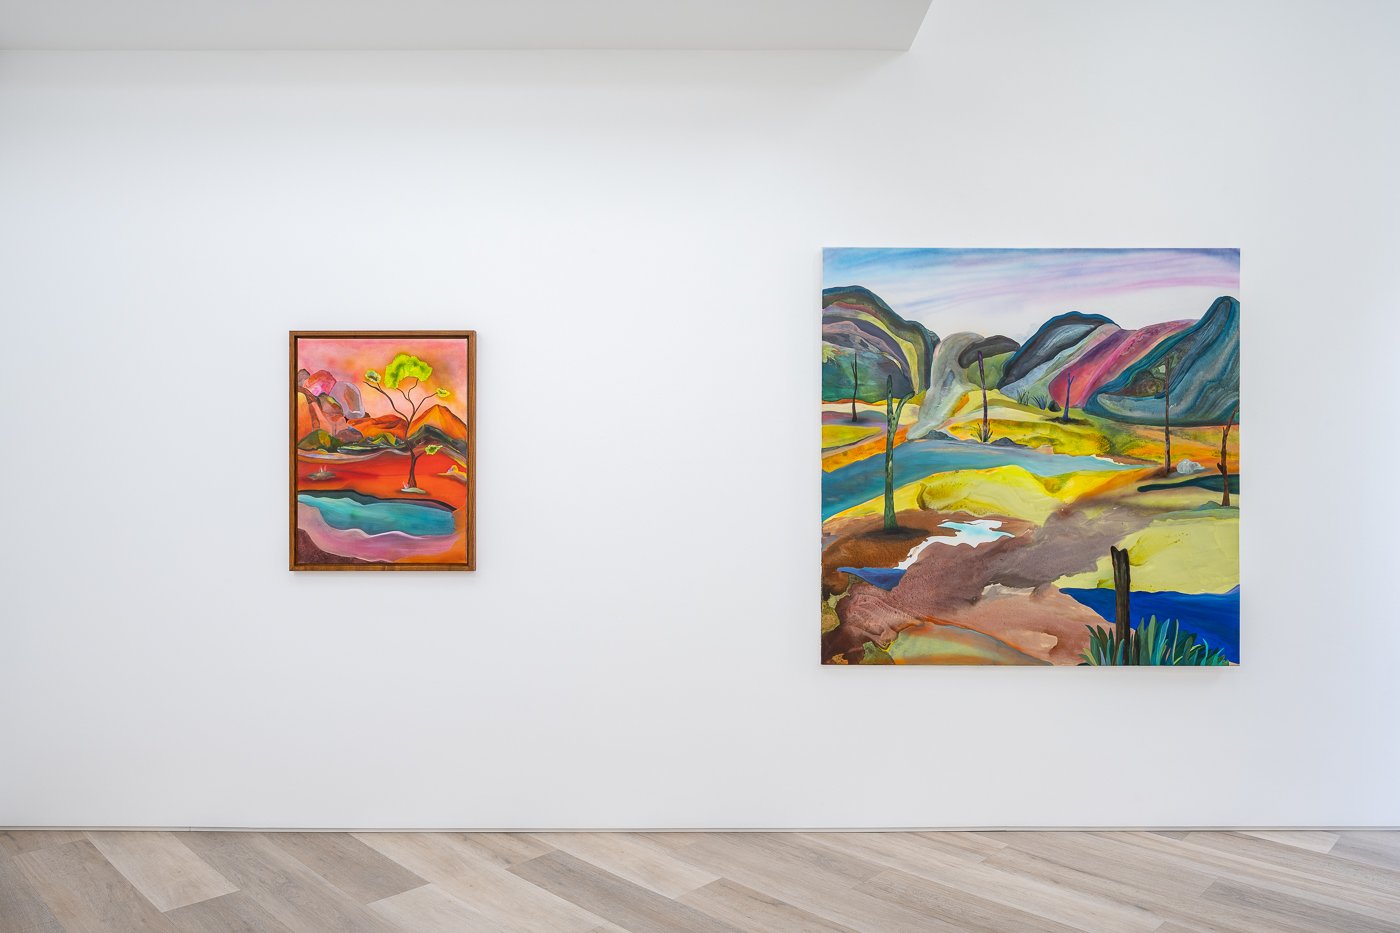 Installation image for Ross Taylor: Time of the Season, at BEERS London